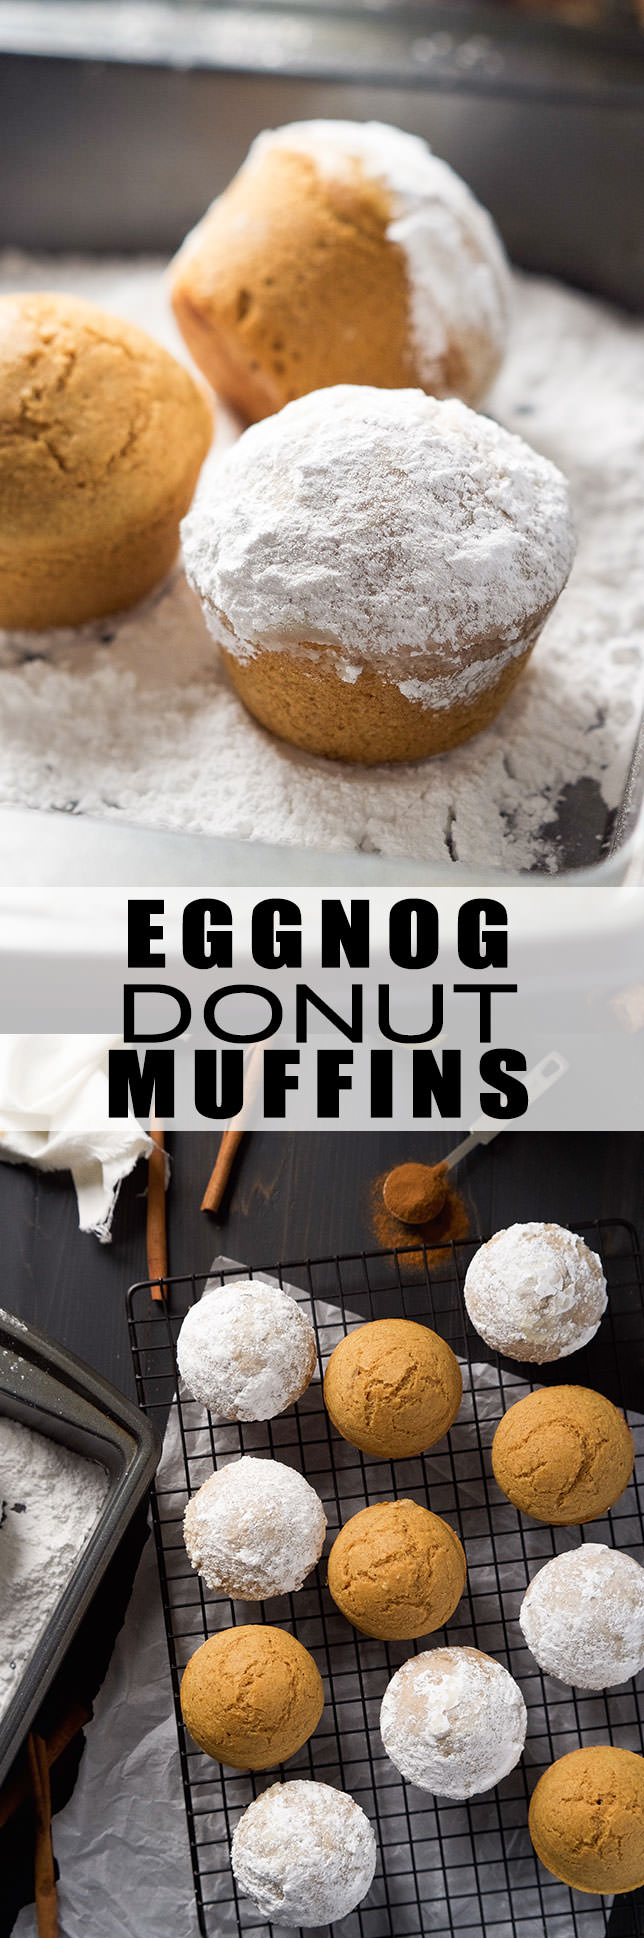 These Eggnog Donut Muffins are light and fluffy like cake donuts plus filled with the delicious flavor of eggnog. The perfect breakfast treat during the holidays!